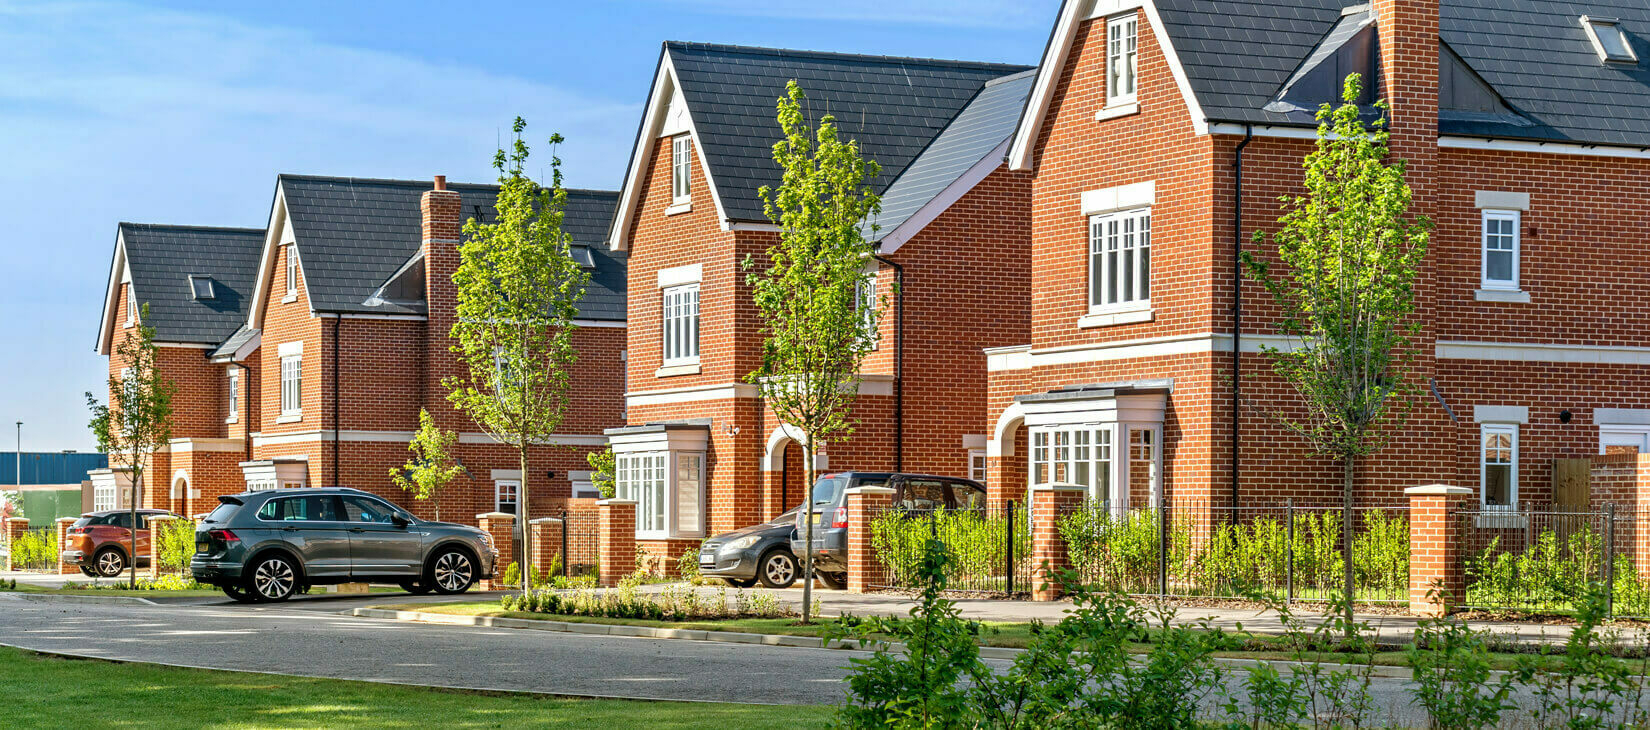 The story of Chesterwell new build homes development in Colchester, Essex by Mersea Homes